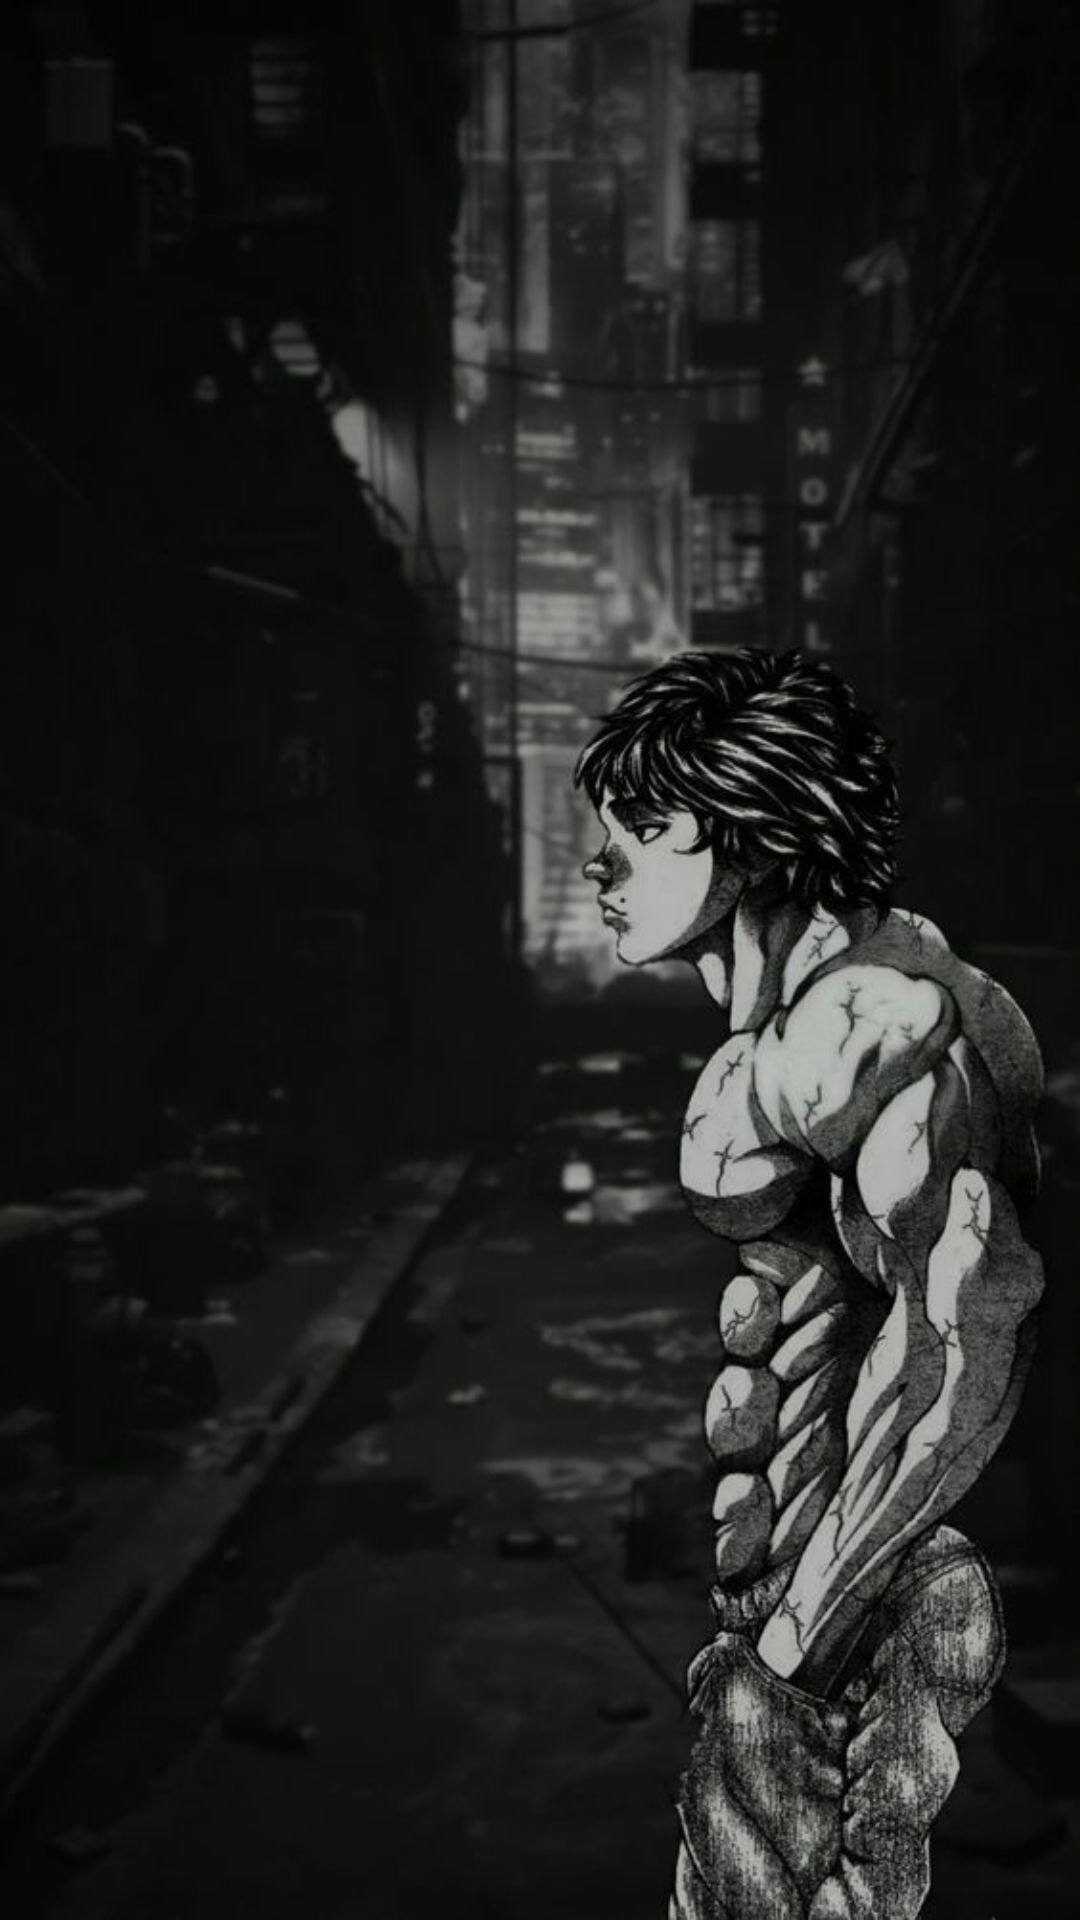 20 most powerful Baki characters, ranked from strongest to weakest -  Legit.ng